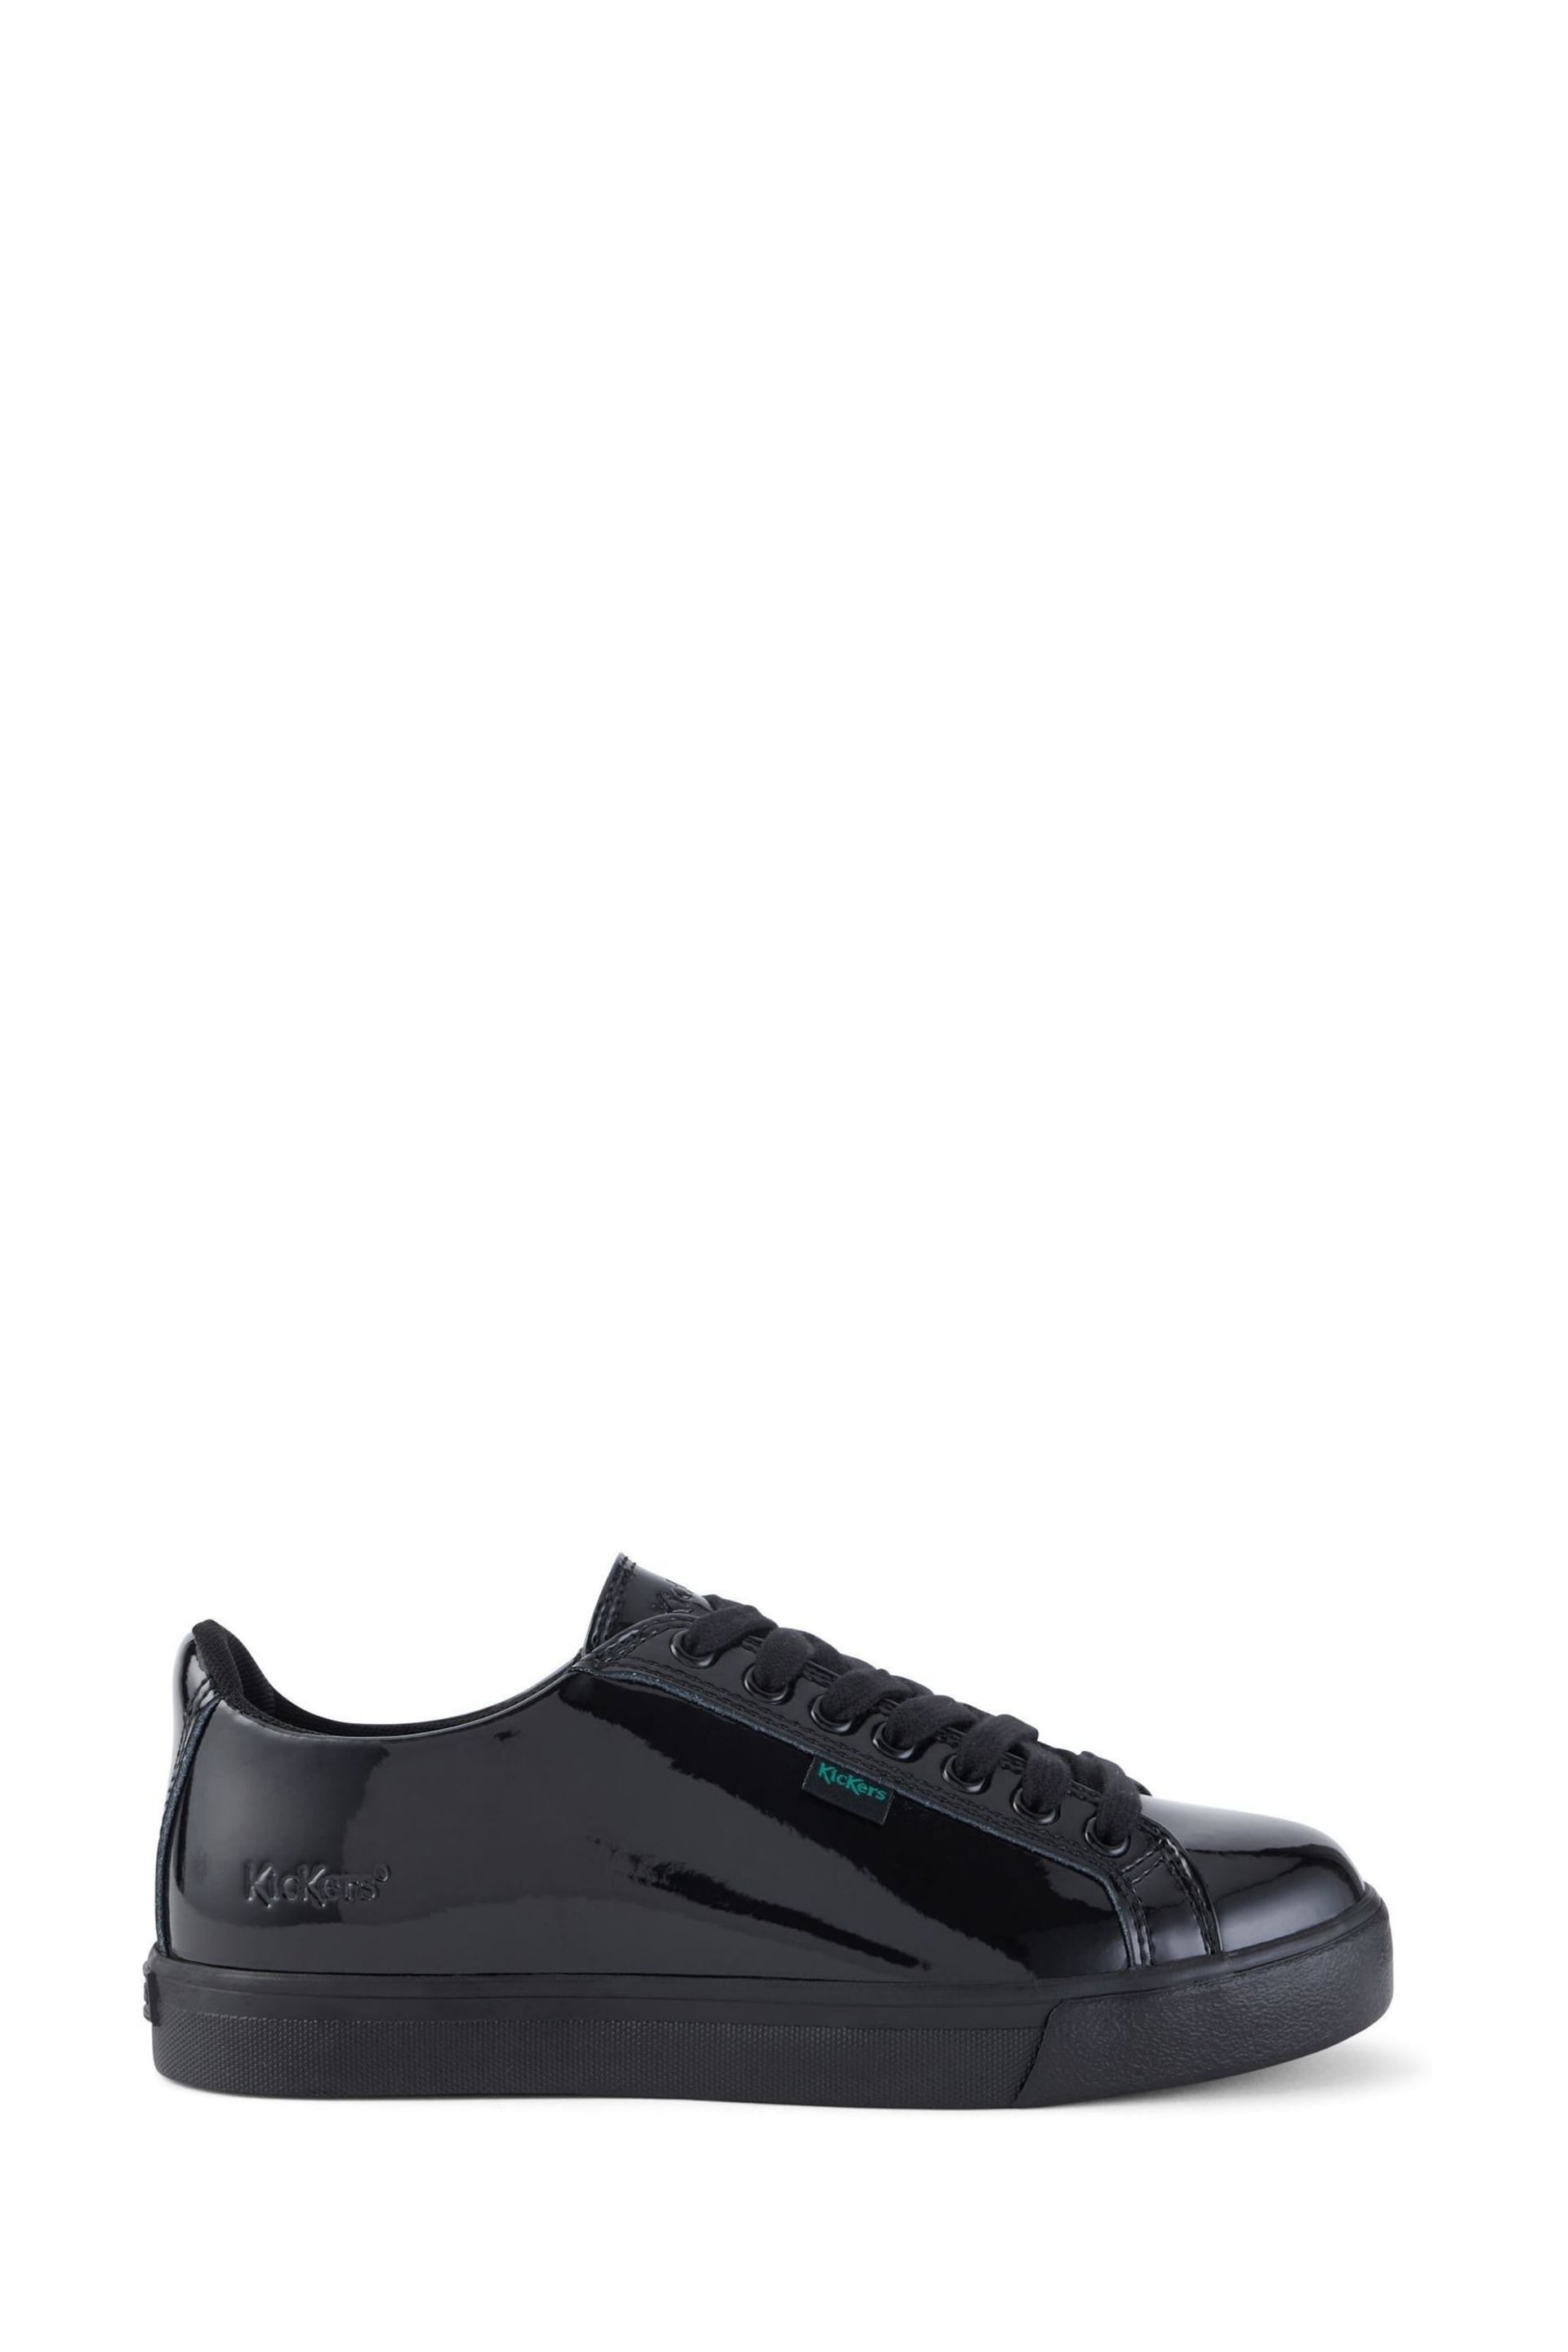 Kickers Black Tovni Lacer Shoes - Image 1 of 8